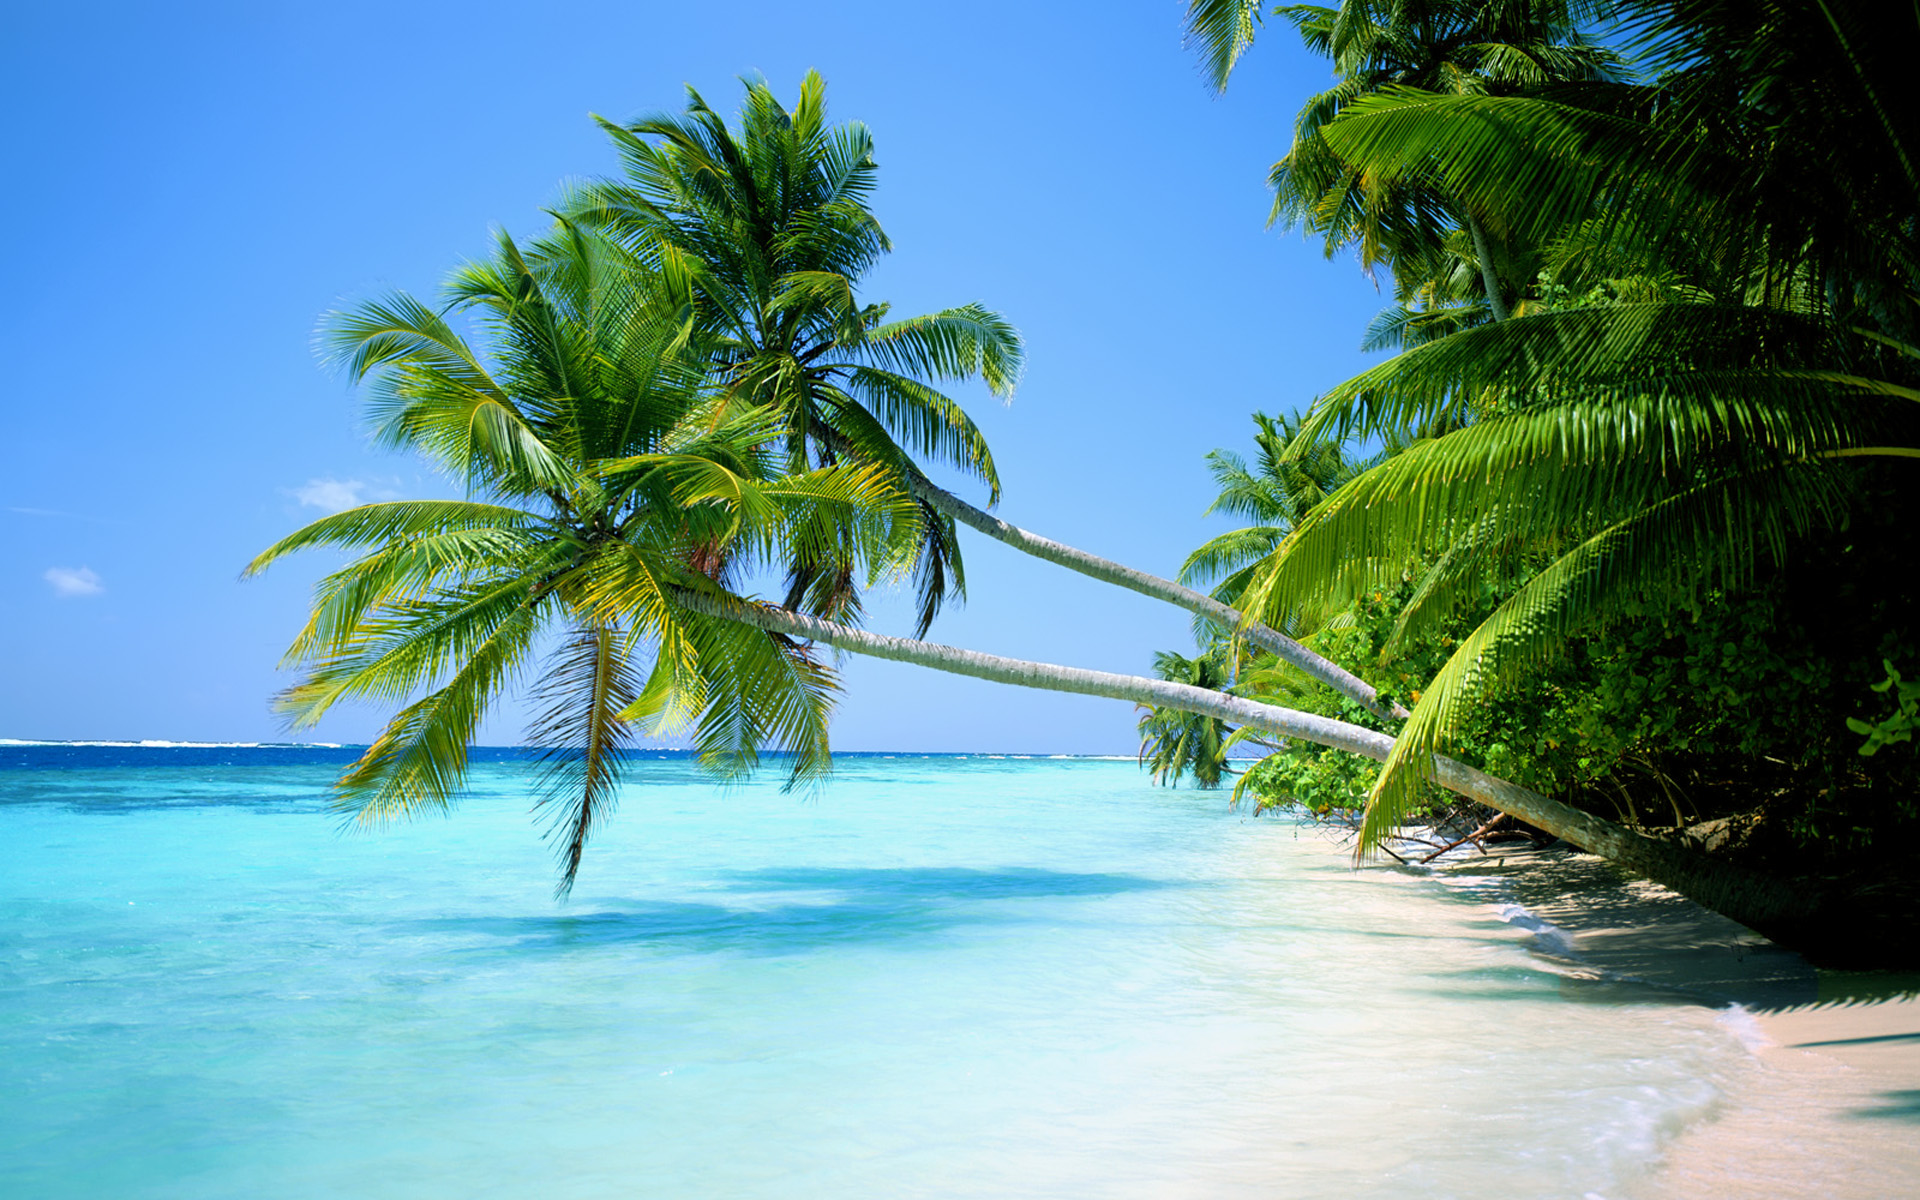 Beach Landscape With Palm T HD Wallpaper Background Image